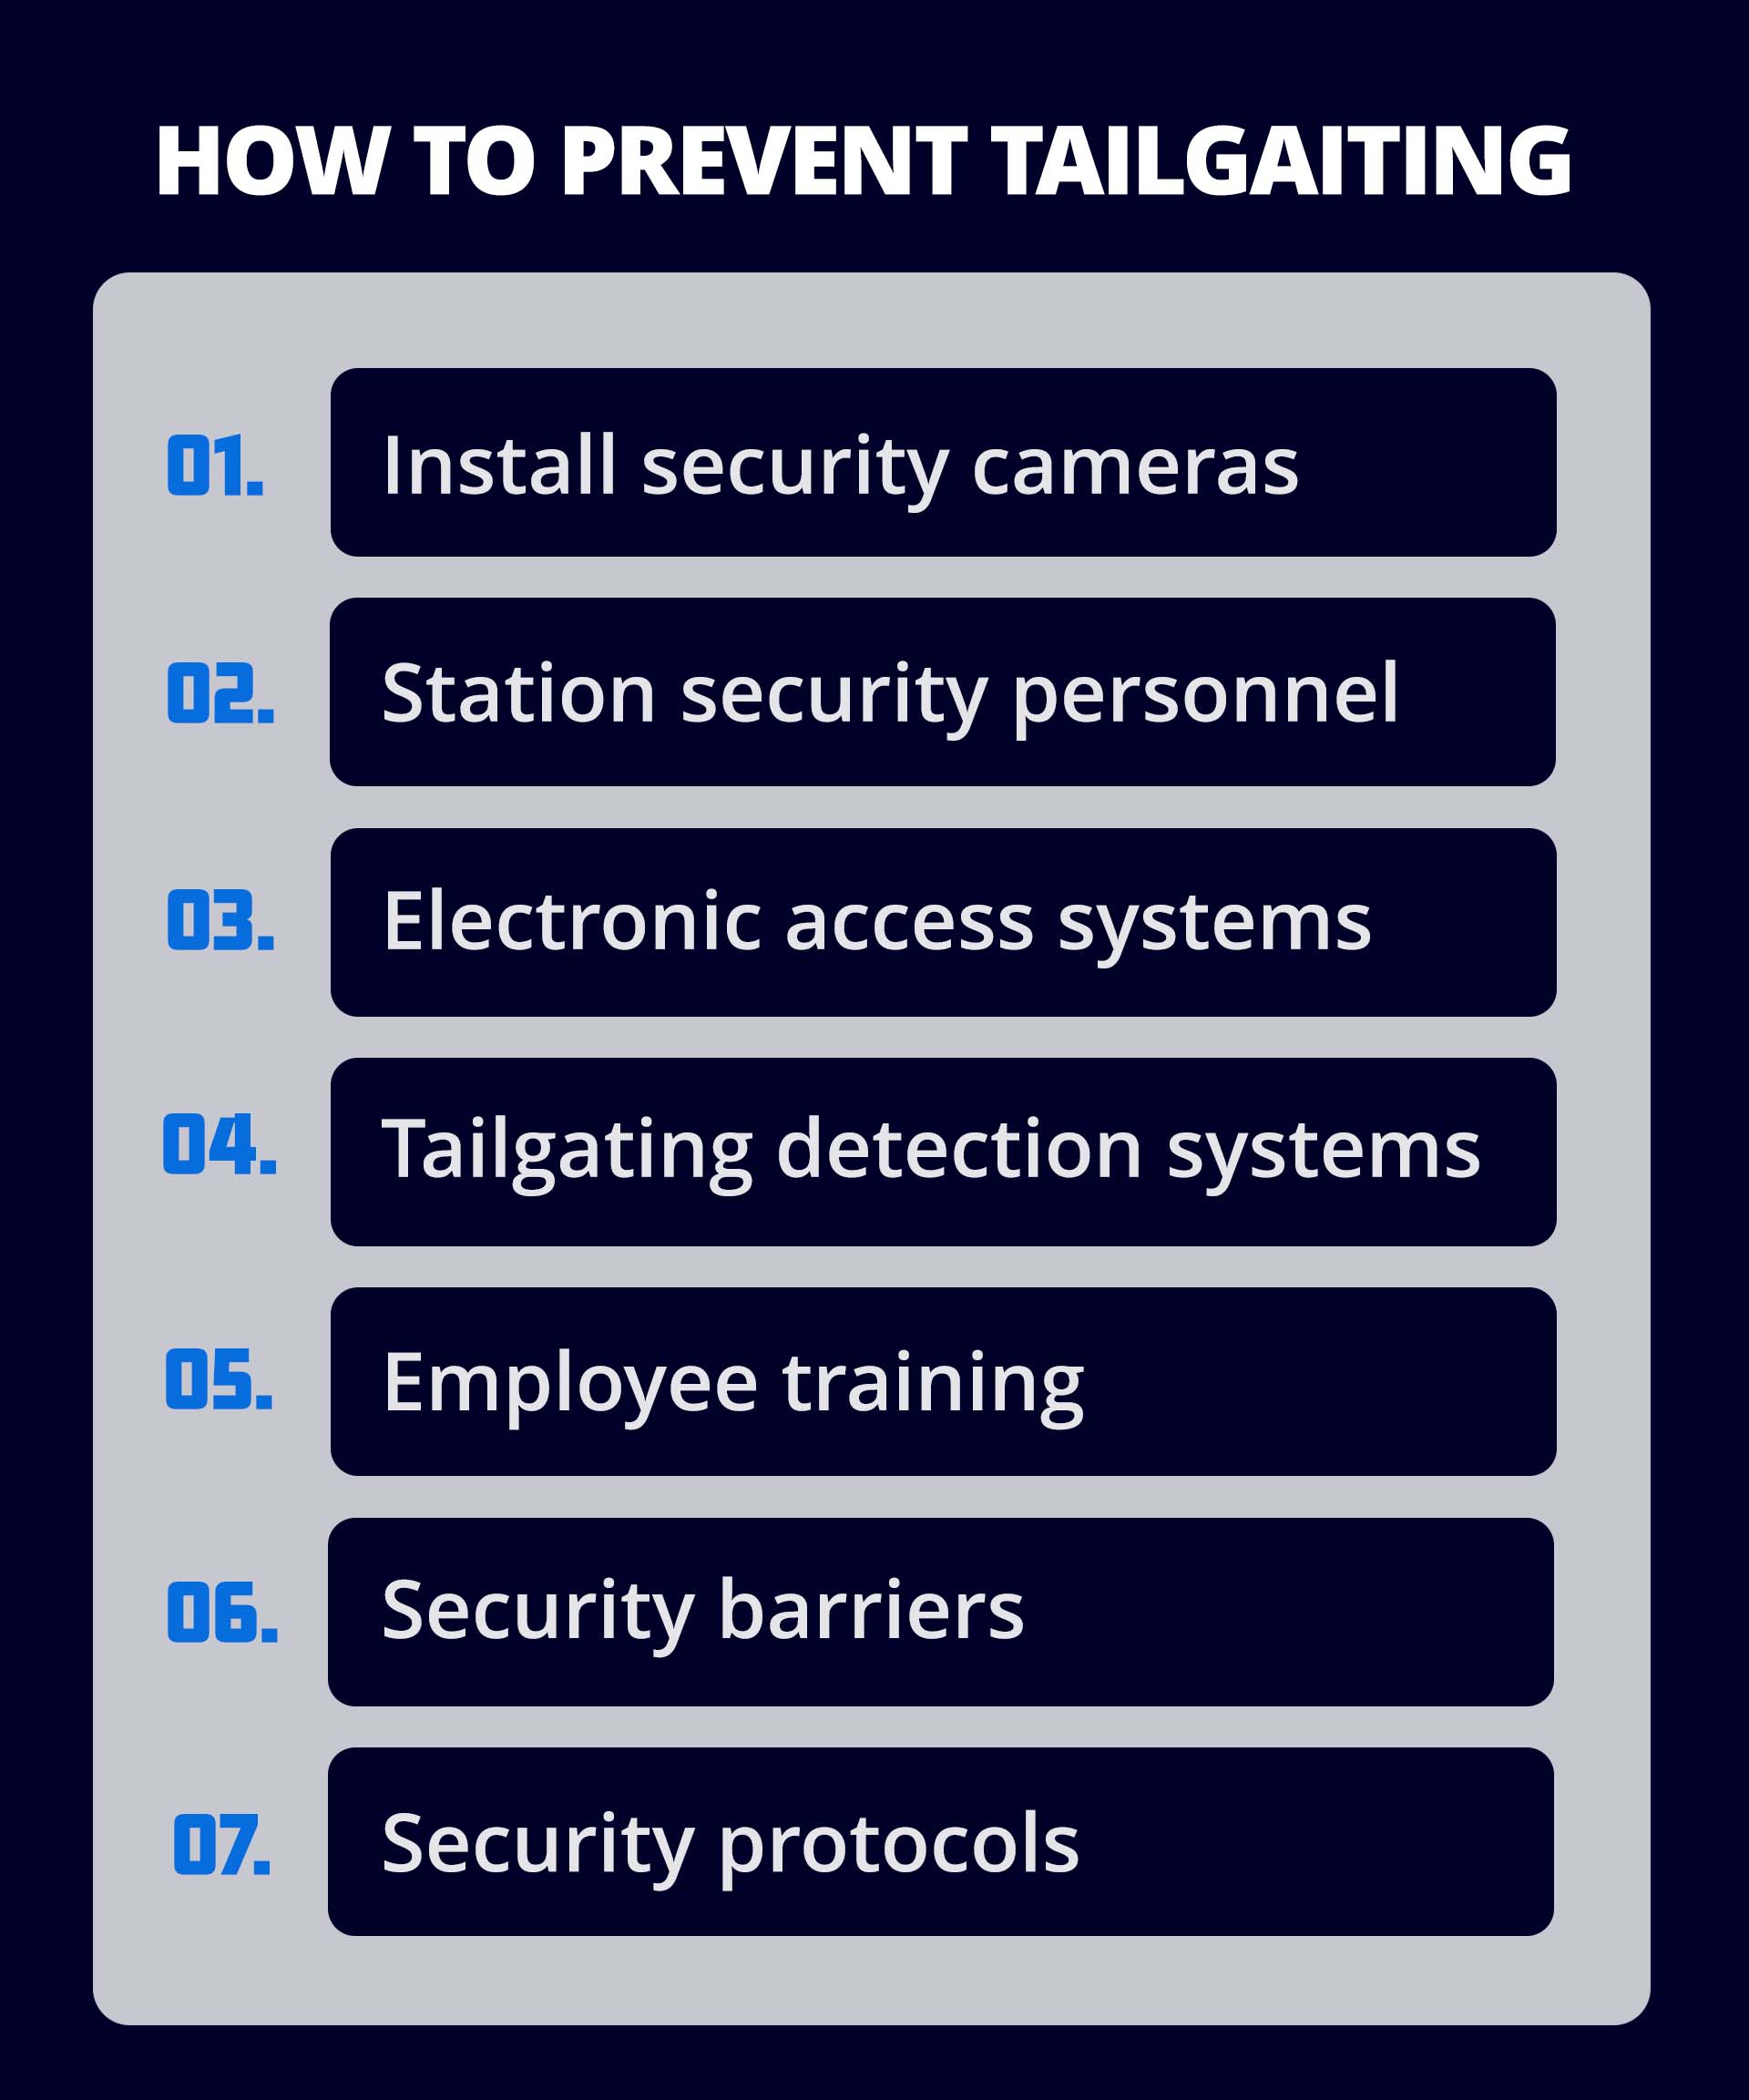 Infographic containing seven tips on how to prevent tailgating, including installing security cameras, stationing security personell, using an electronic access or tailgating system, employee training, security barriers and protocols.